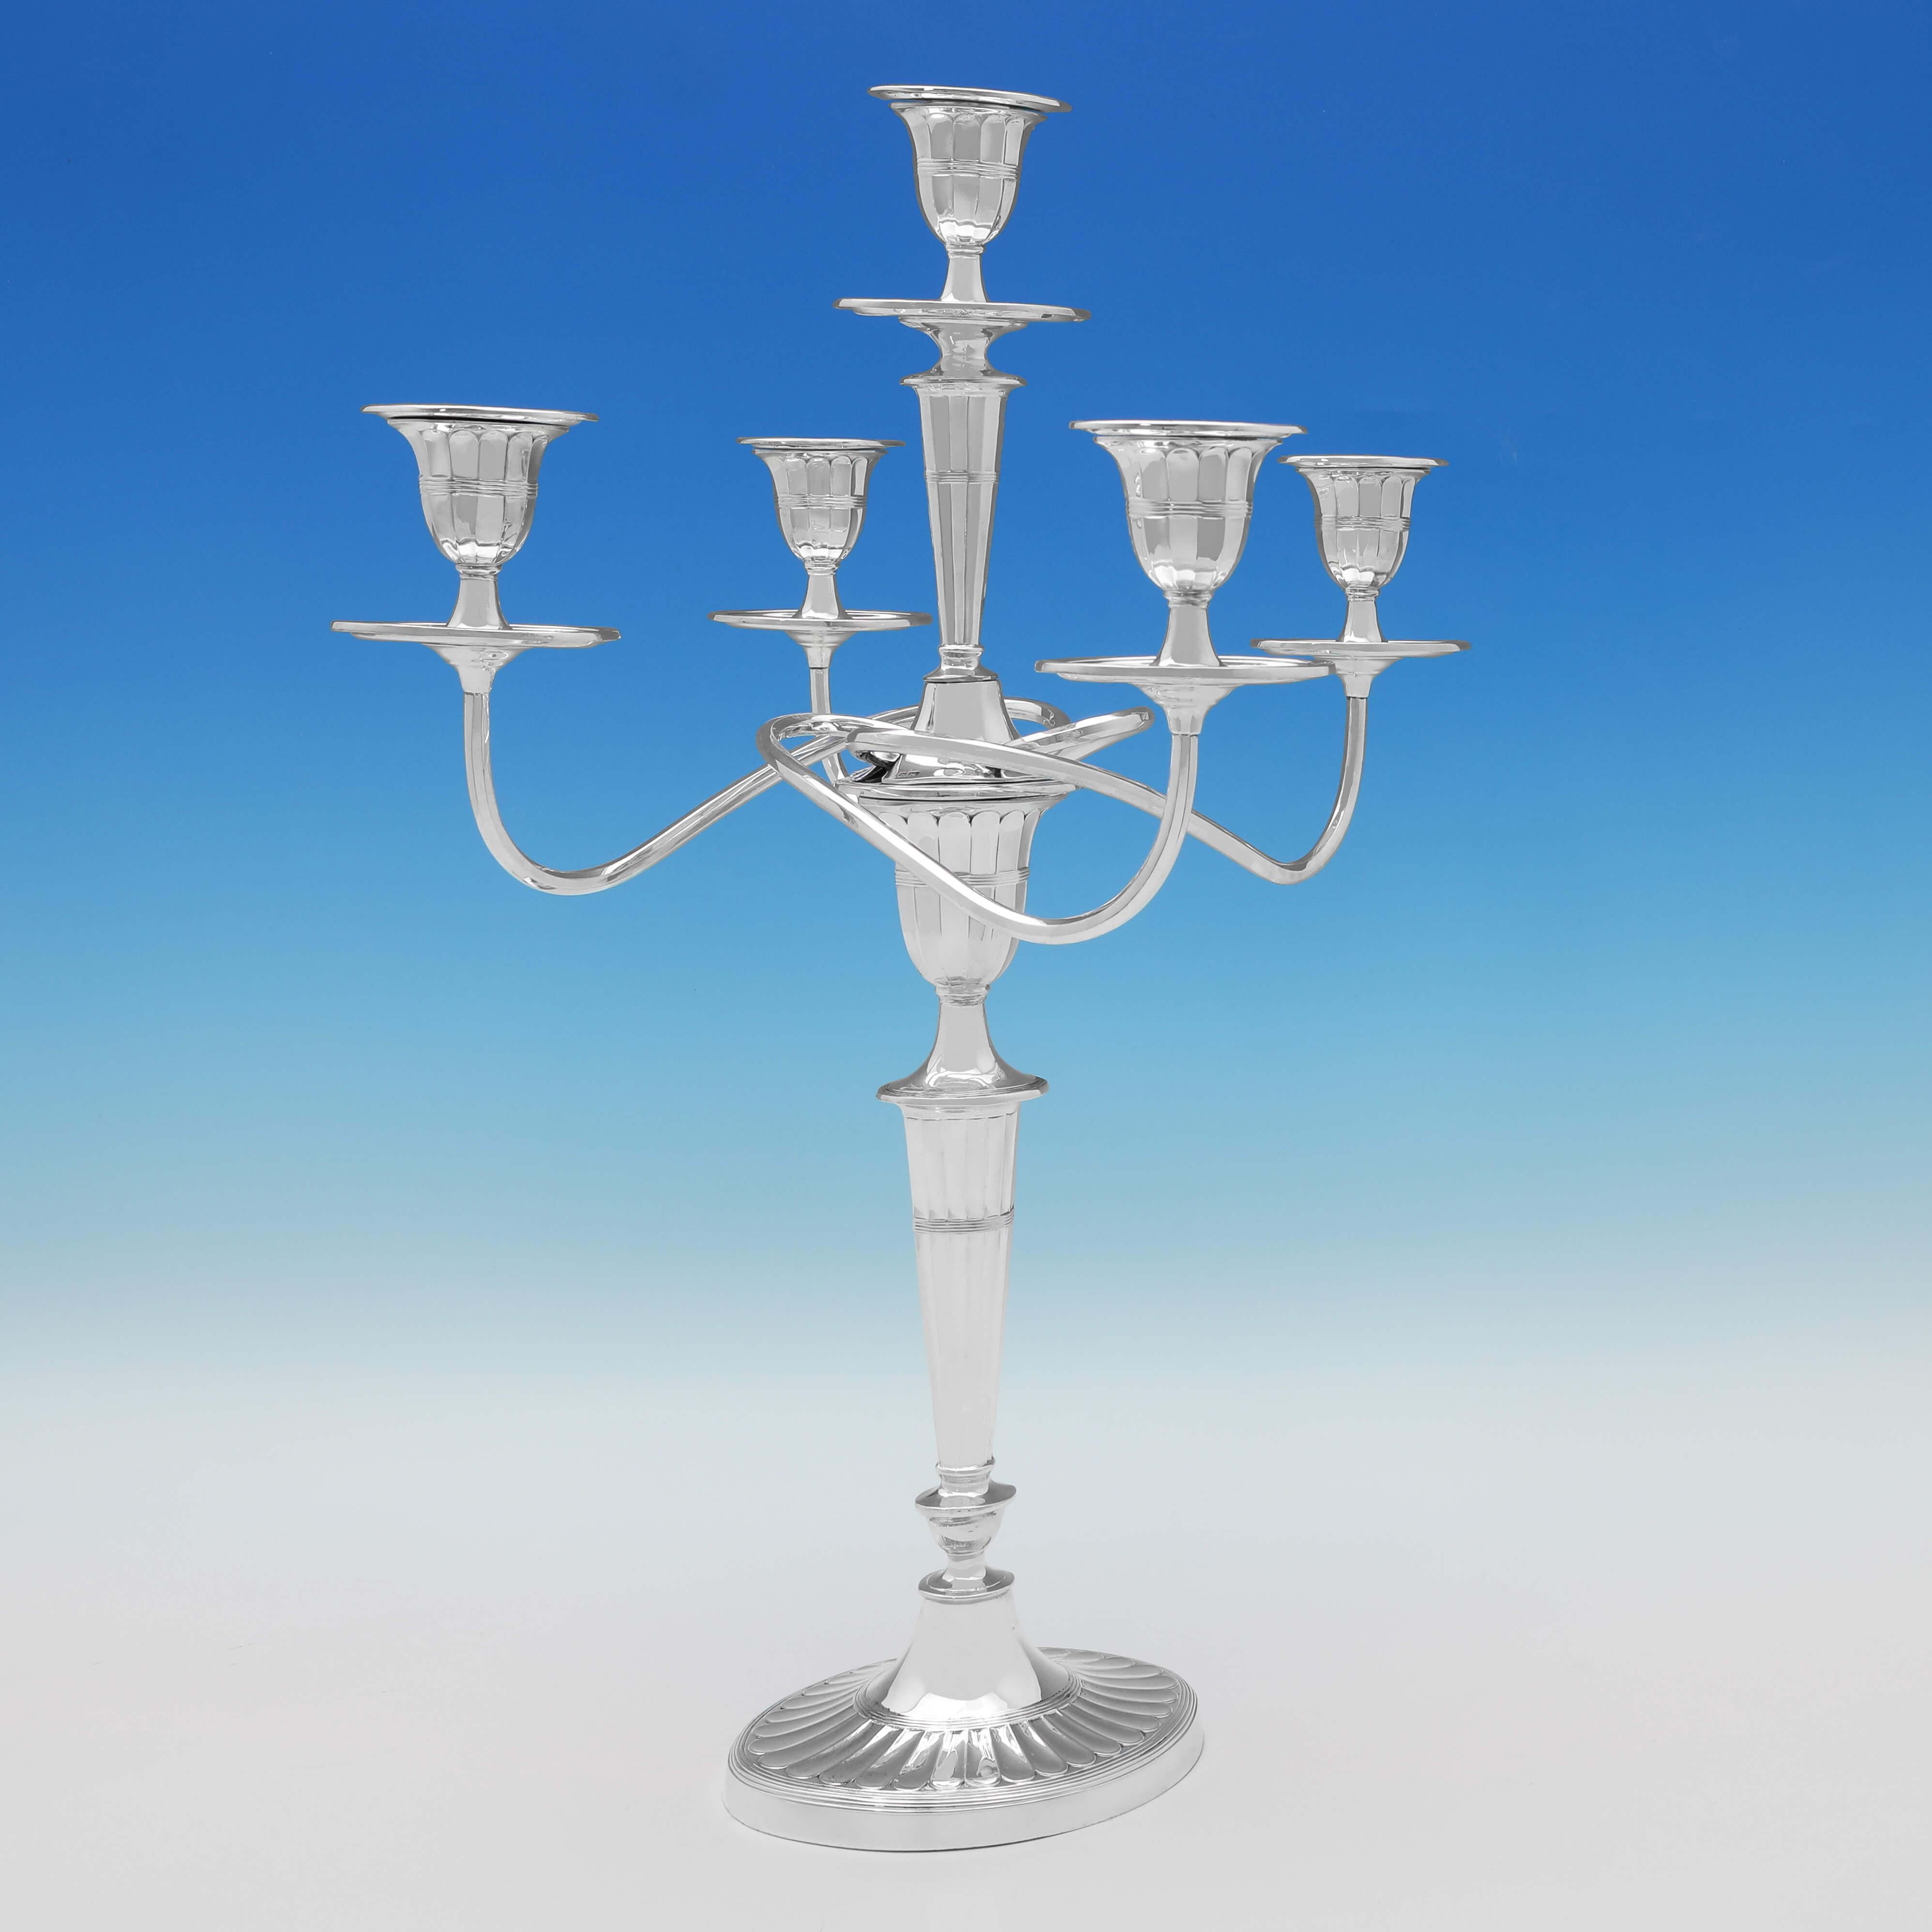 Hallmarked in Sheffield in 1901 by Hawksworth Eyres & Co., this handsome, Victorian pair of antique sterling silver candelabra, are in the 'batwing' style, and will hold 5 candles. Each candelabrum measures 19.5